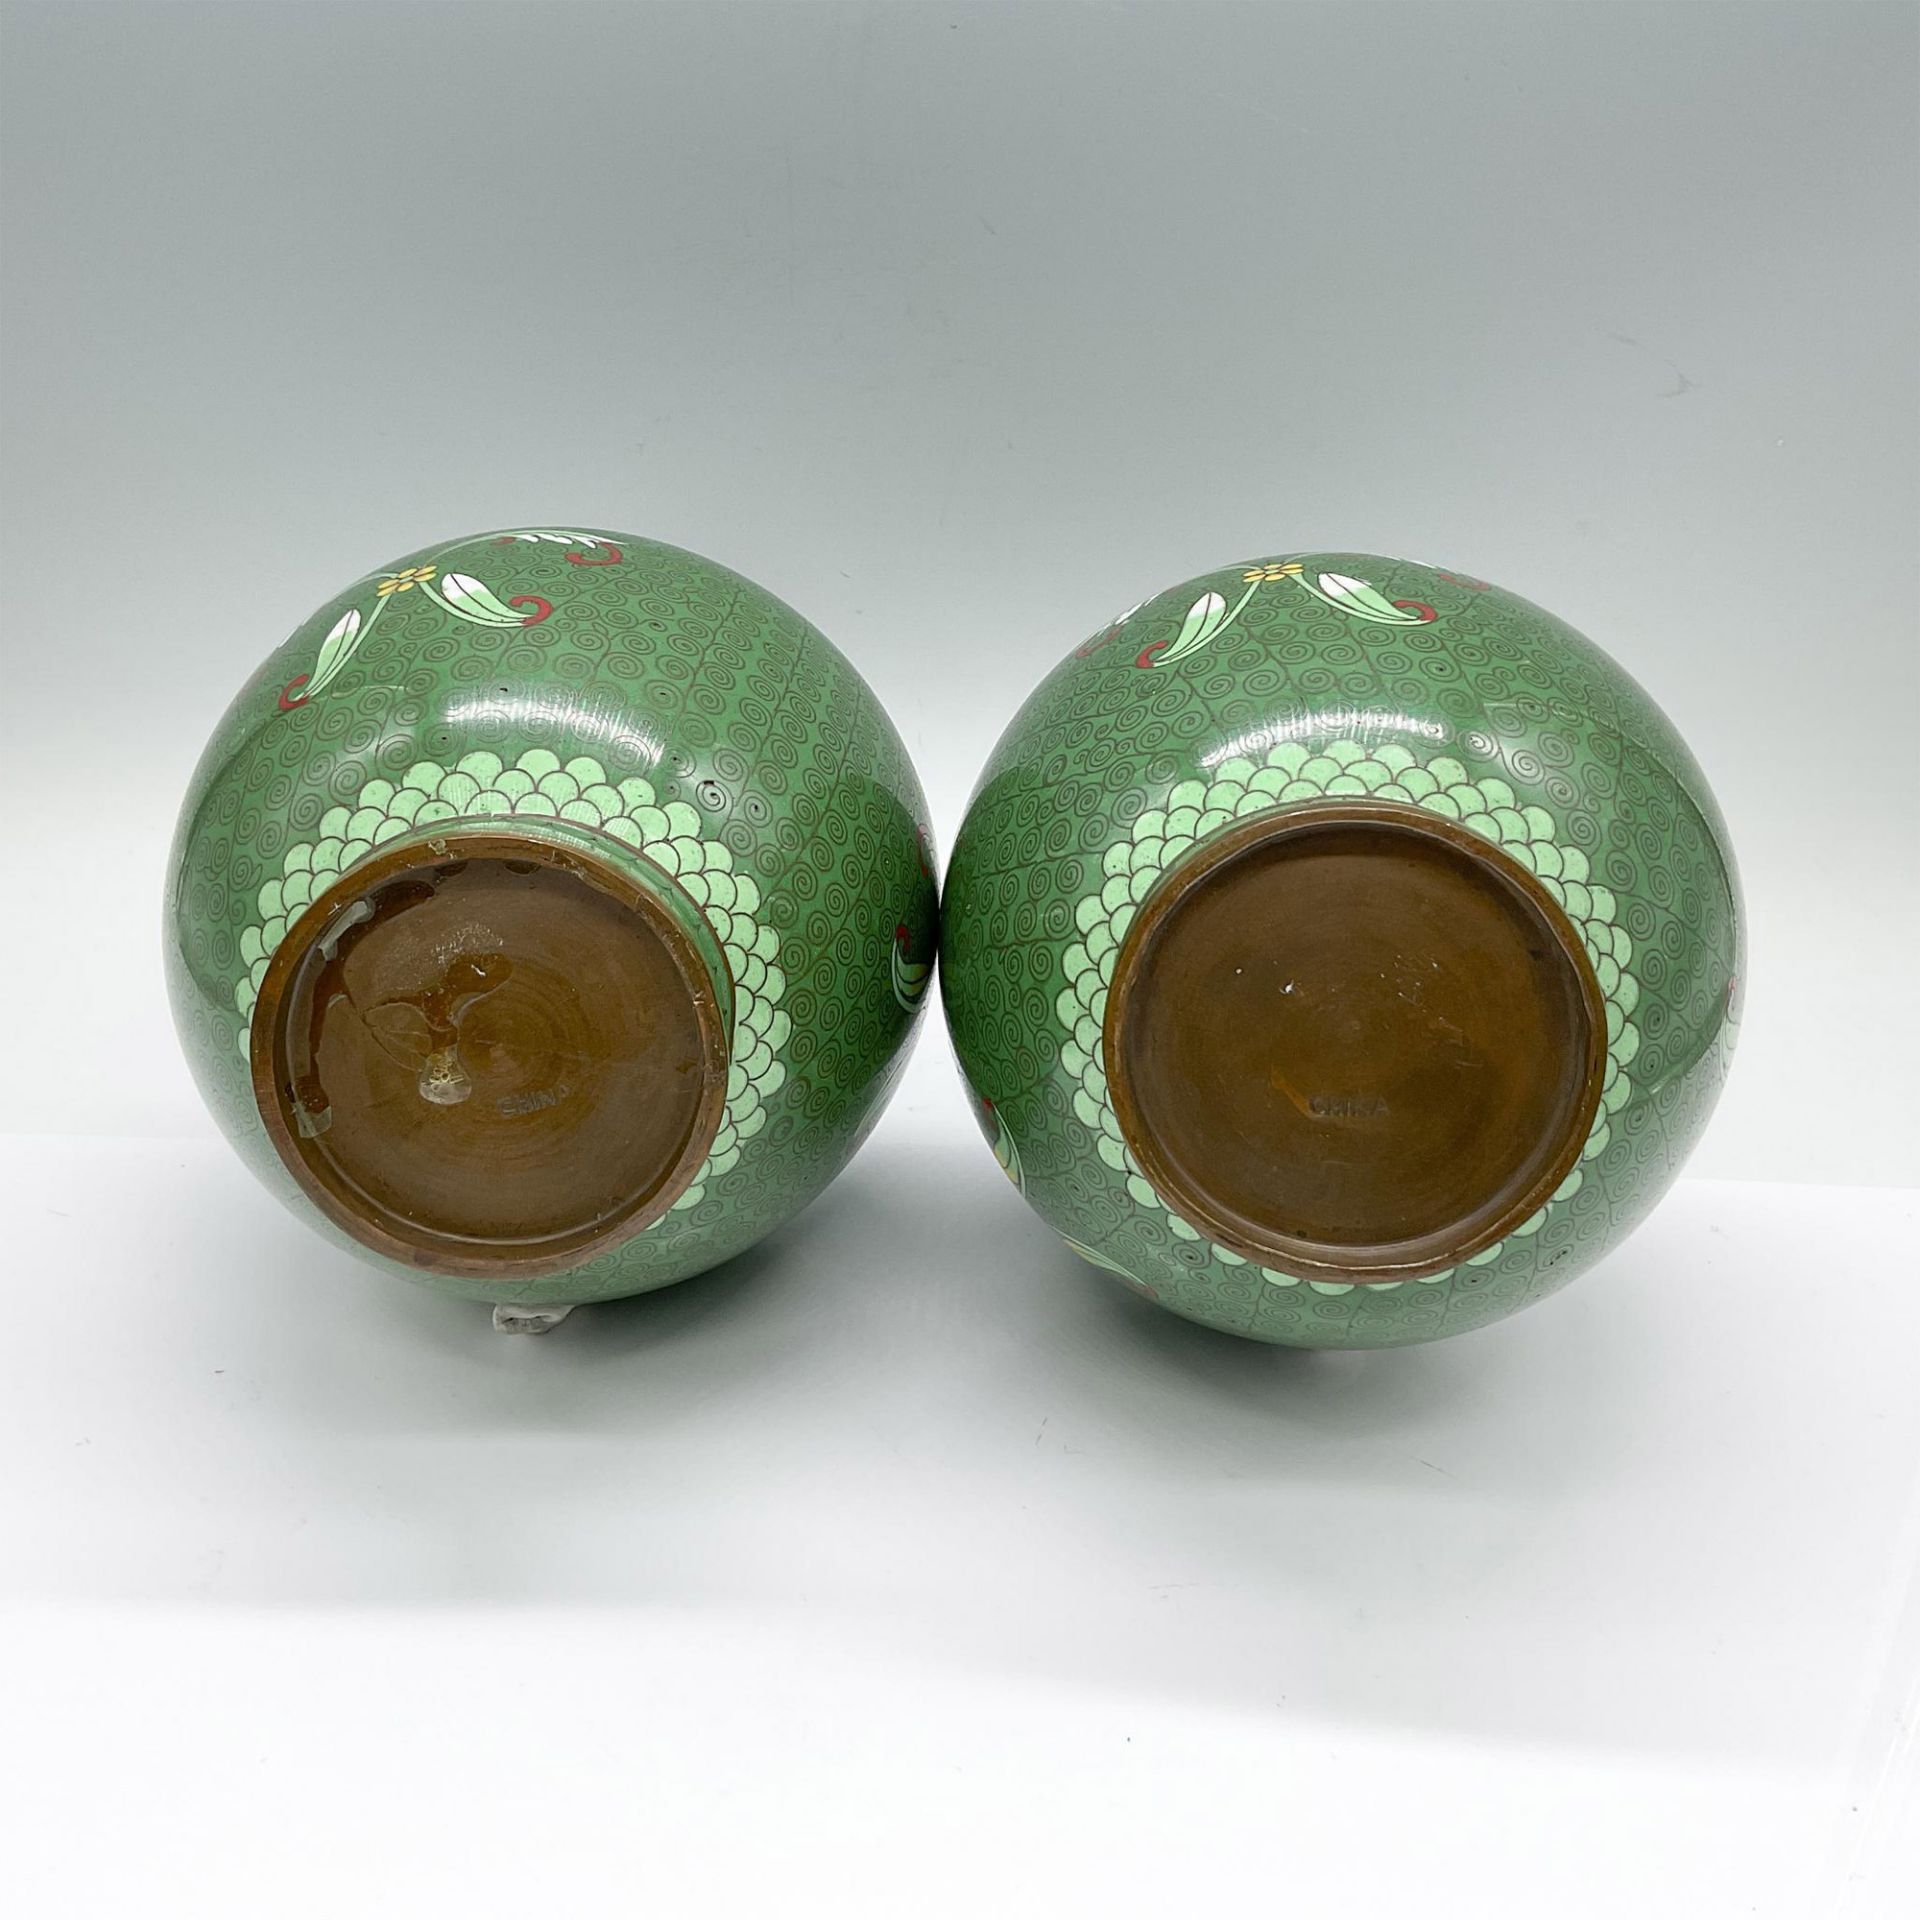 Pair of Vintage Chinese Cloisonne Vases - Image 3 of 3